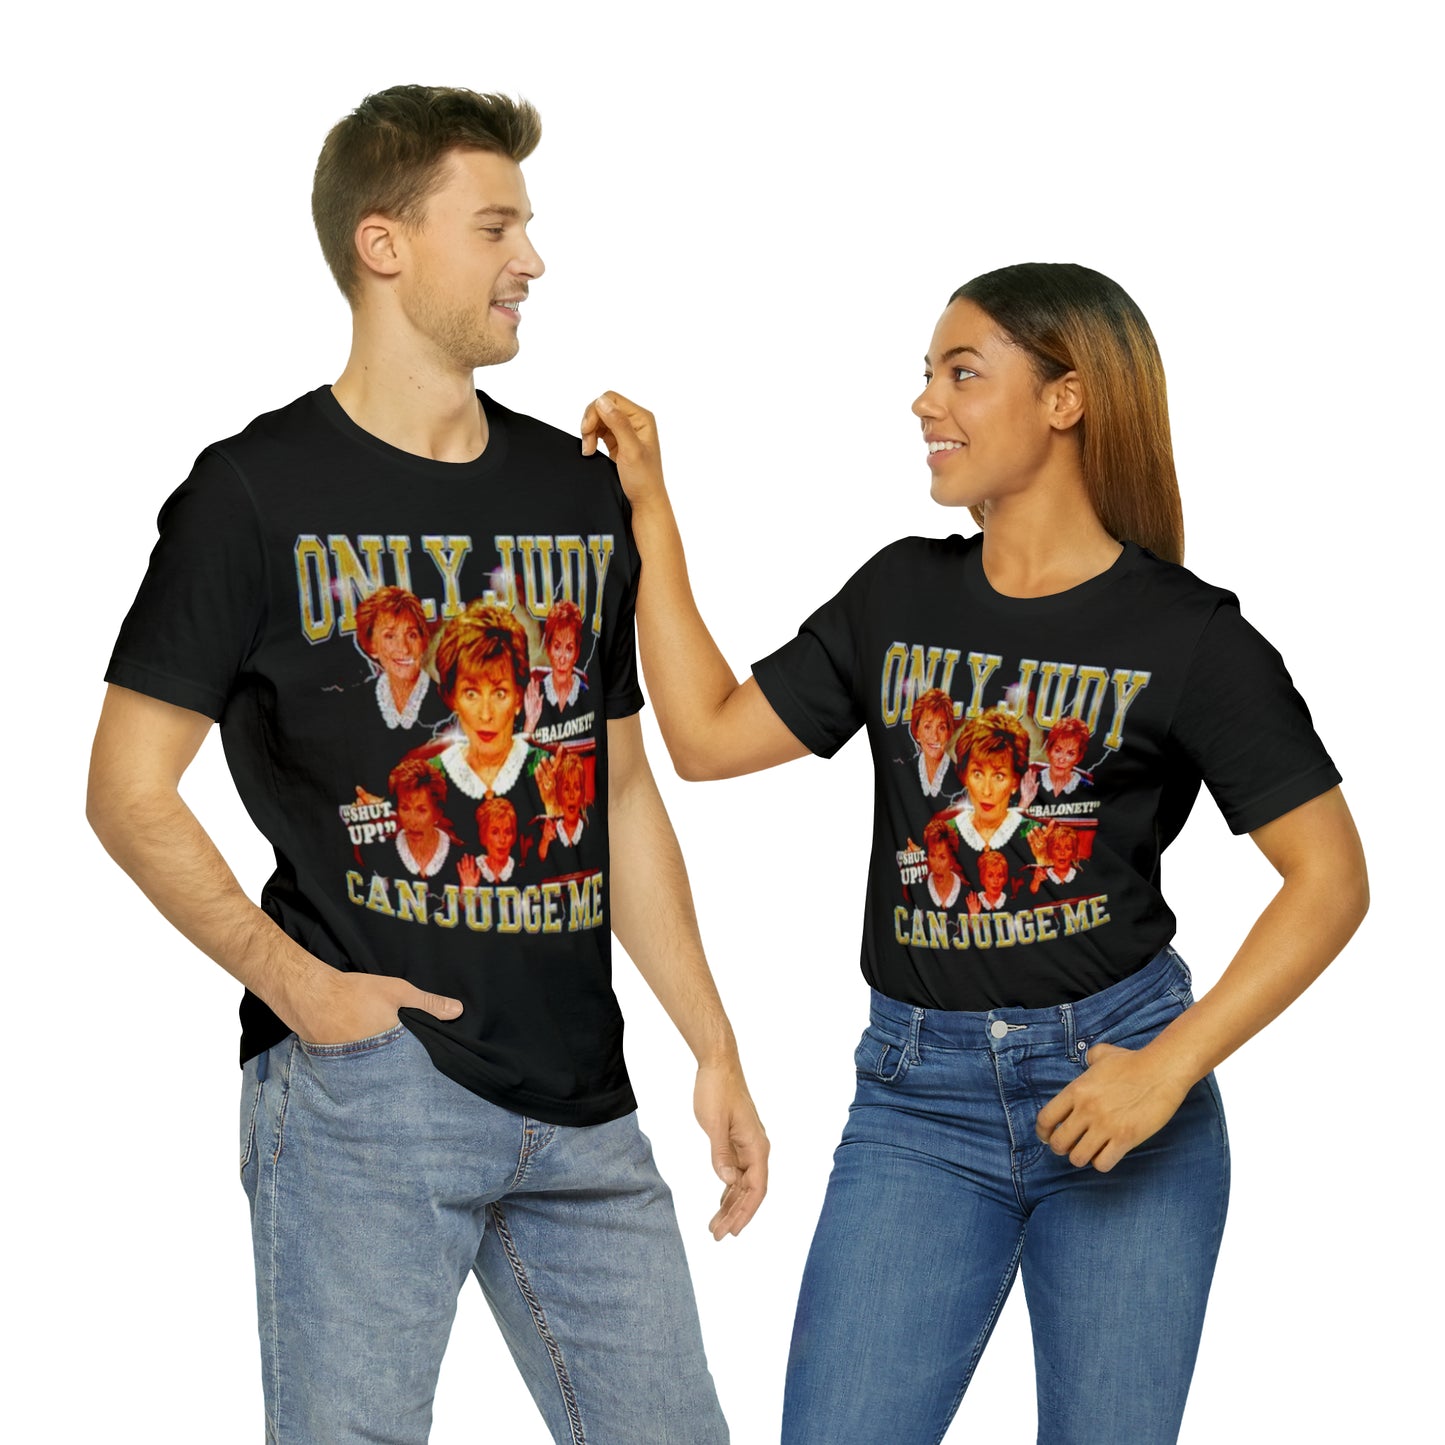 Only Judy Can Judge Me! Unisex Jersey Short Sleeve Tee